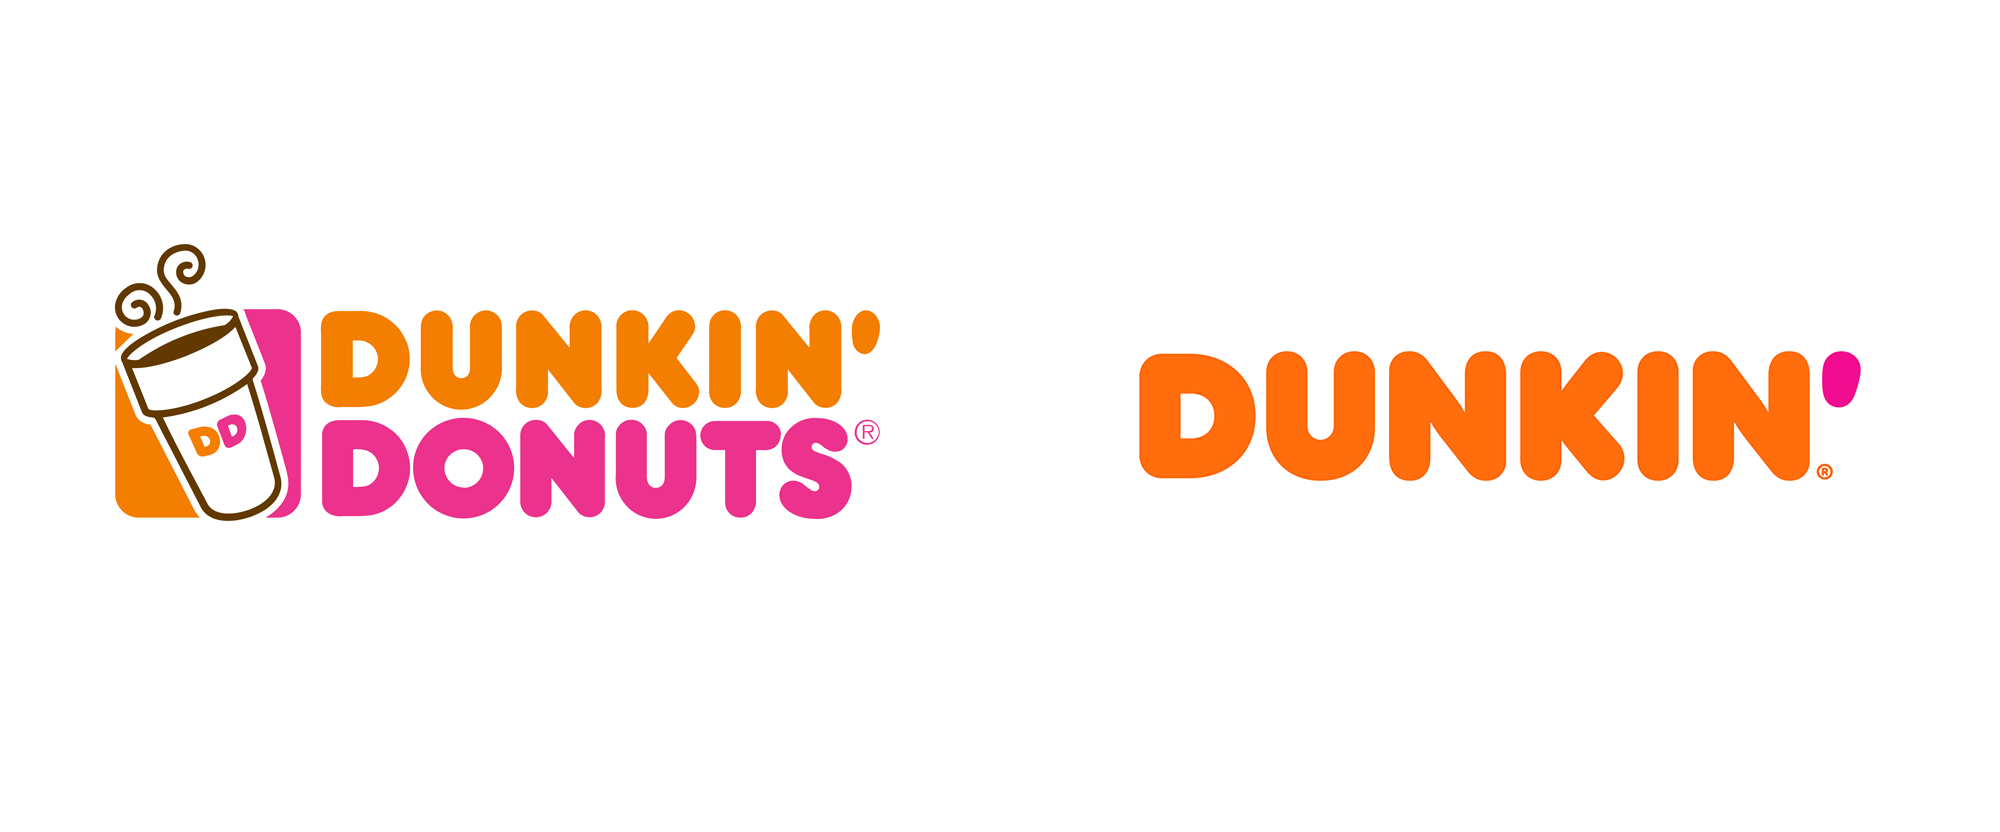 Brand New: New Name and Logo for Dunkin' by Jones Knowles Ritchie.